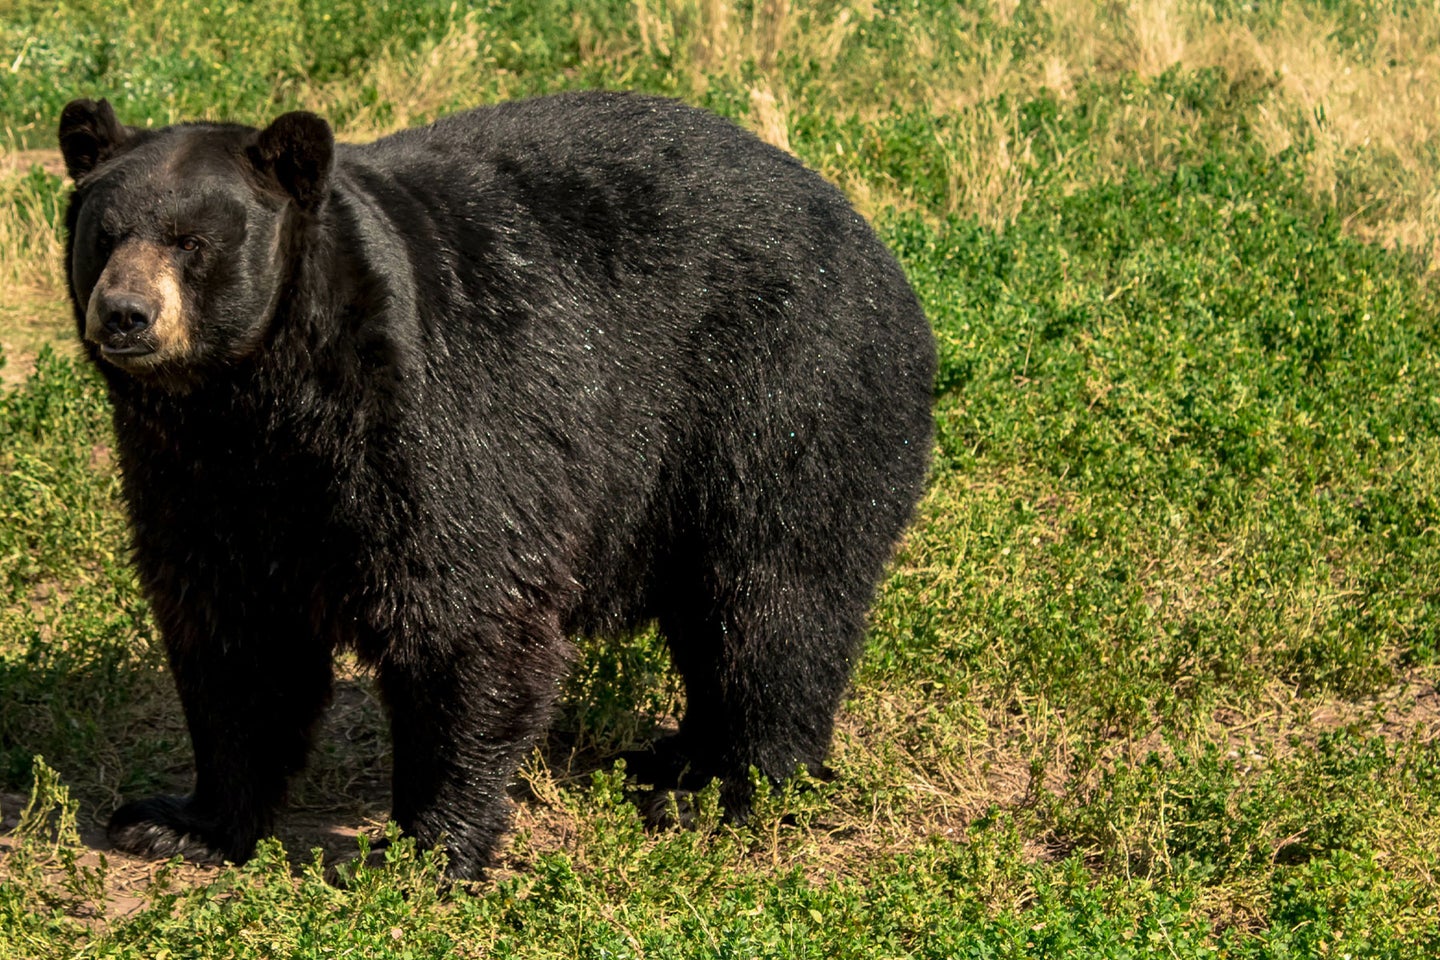 A black bear stands in a field of green grass.